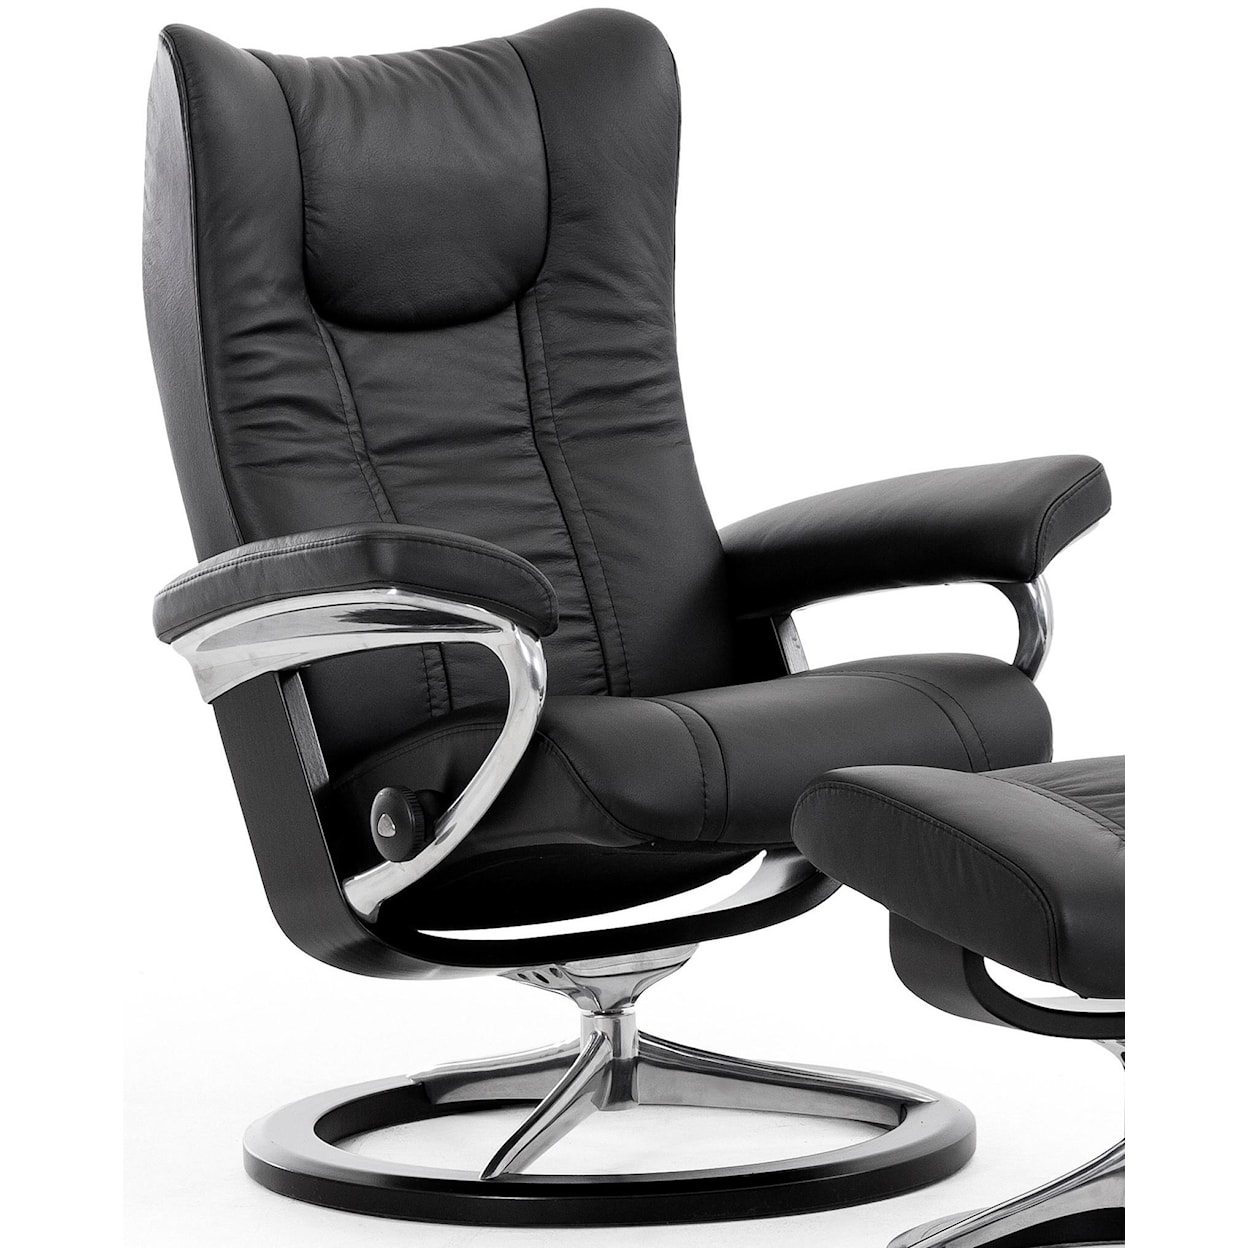 Stressless by Ekornes Wing Large Reclining Chair with Signature Base